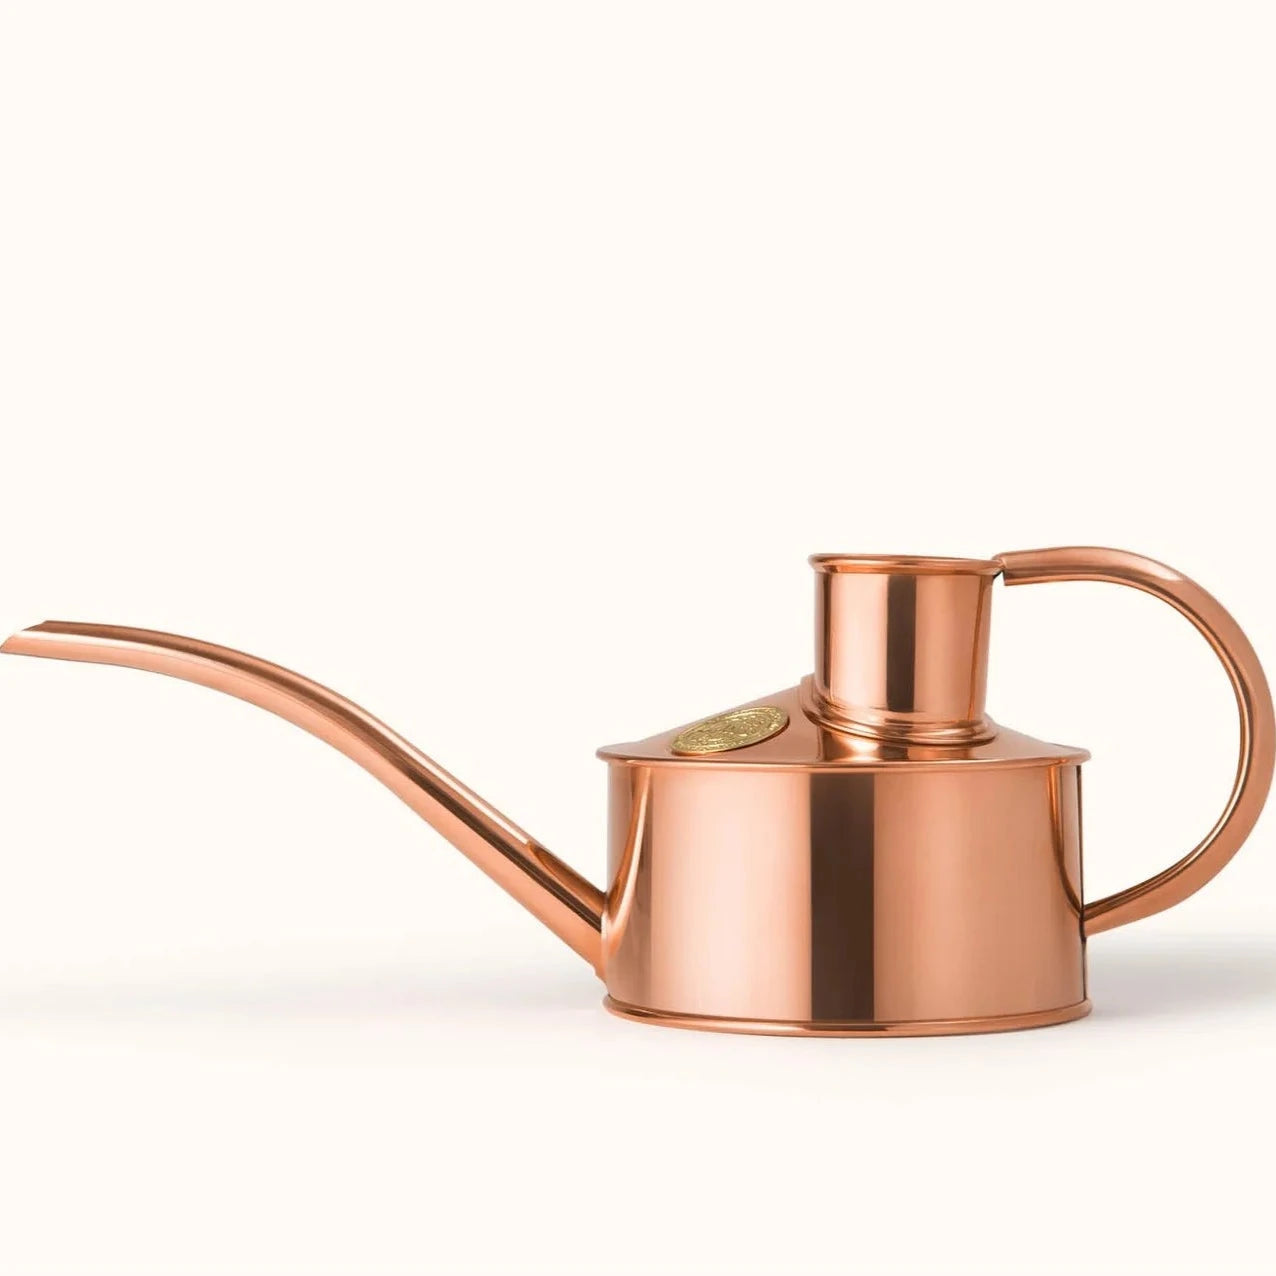 The beautiful Haws Copper Fazeley Flow one pint watering can 